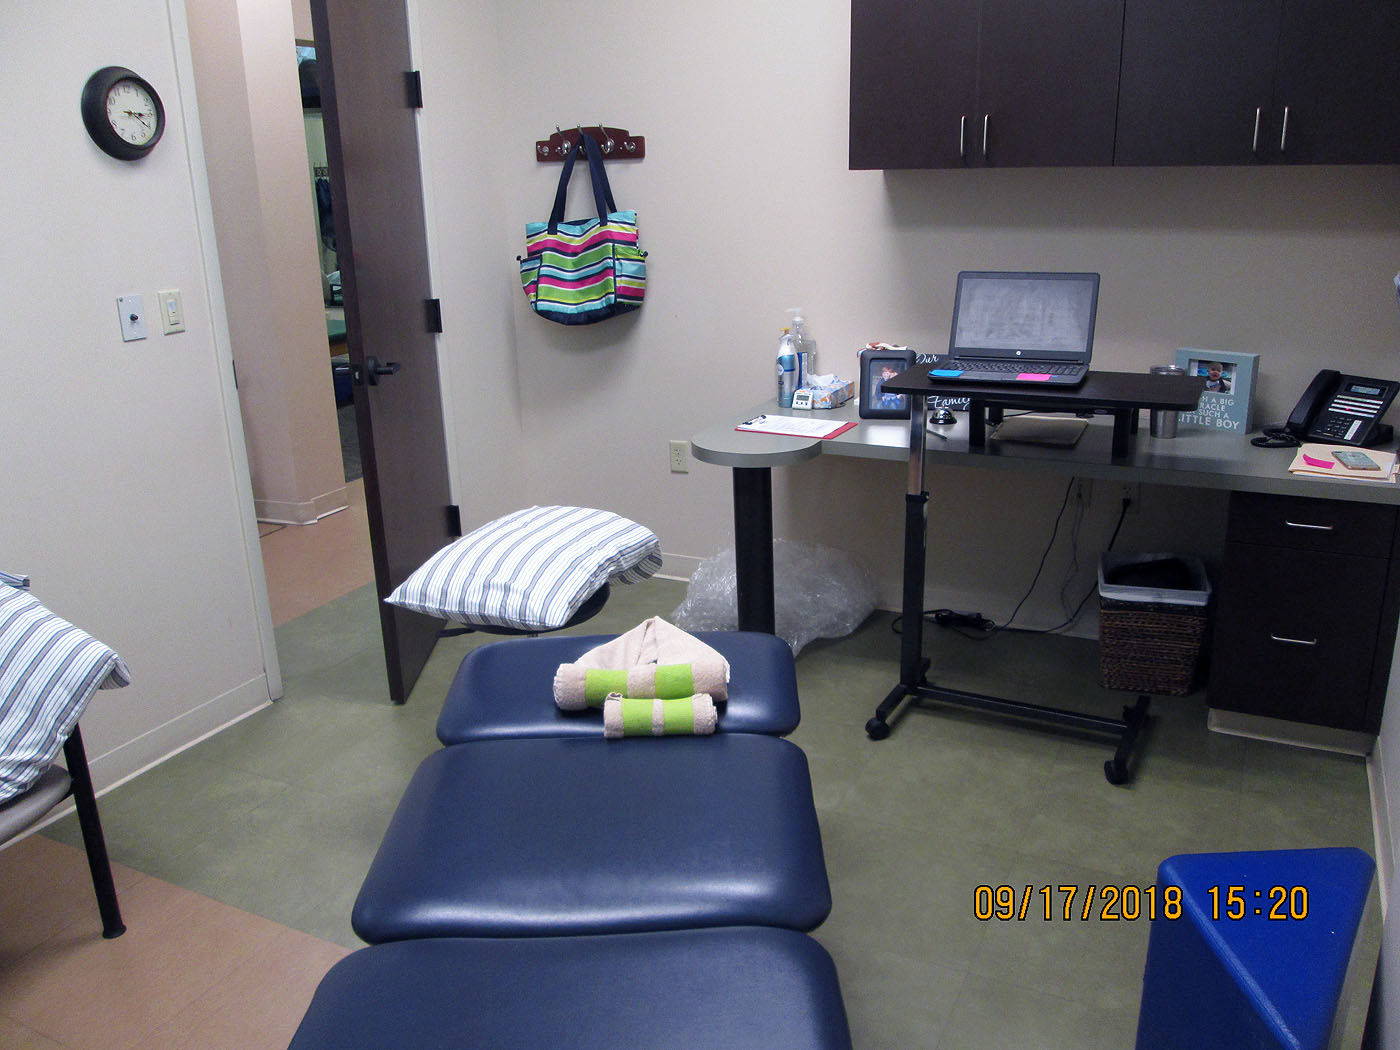 Physical therapy room.